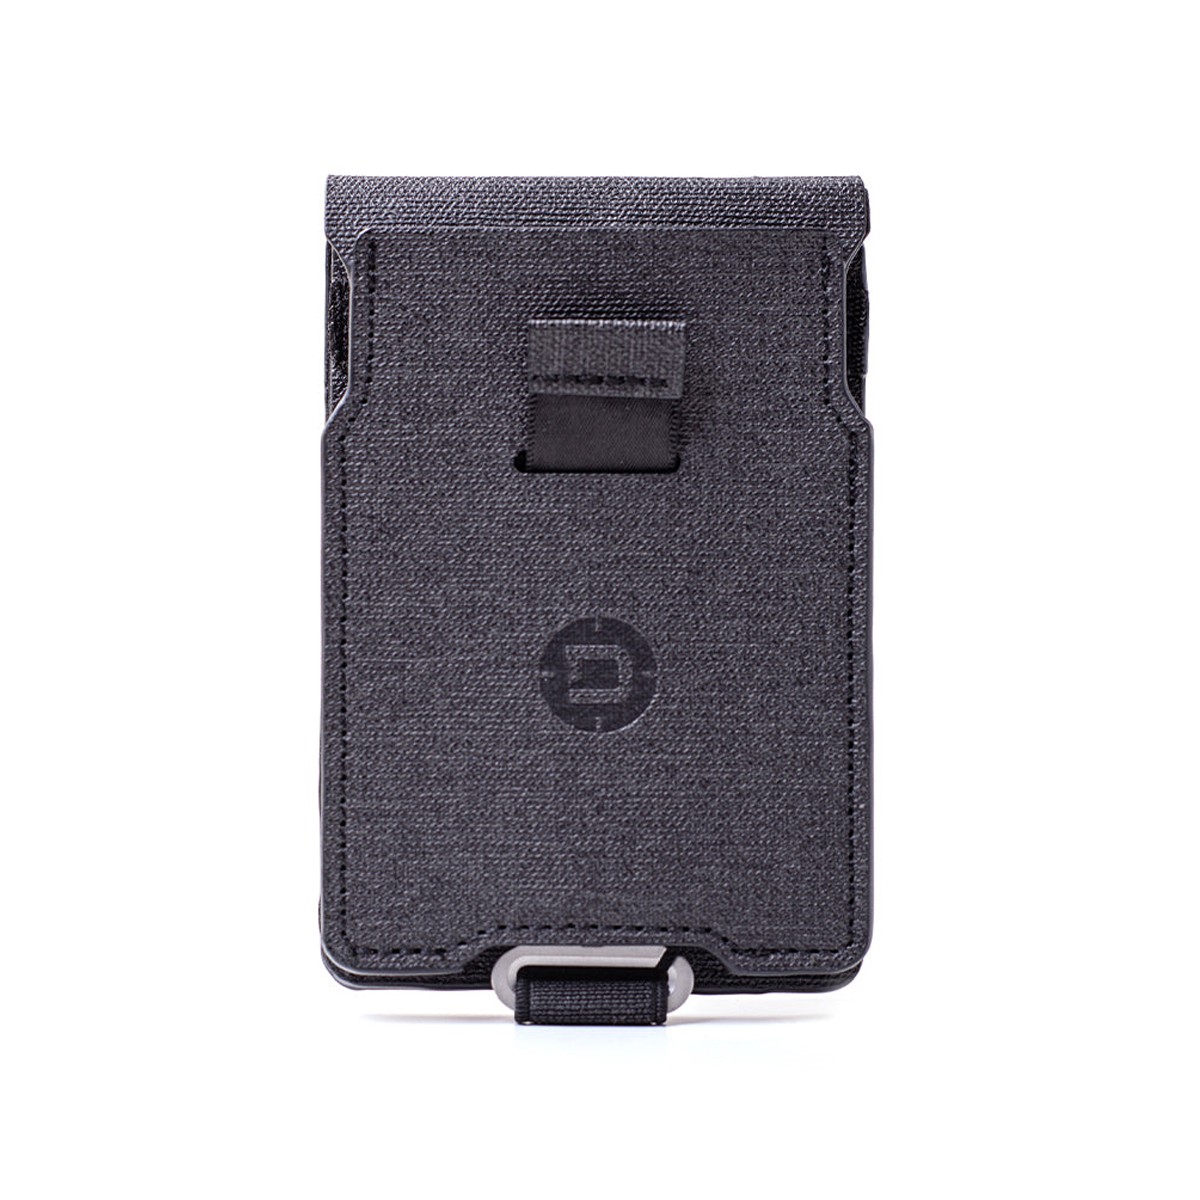 Dango Products S2 Stealth™ Bifold Wallet - Mukama